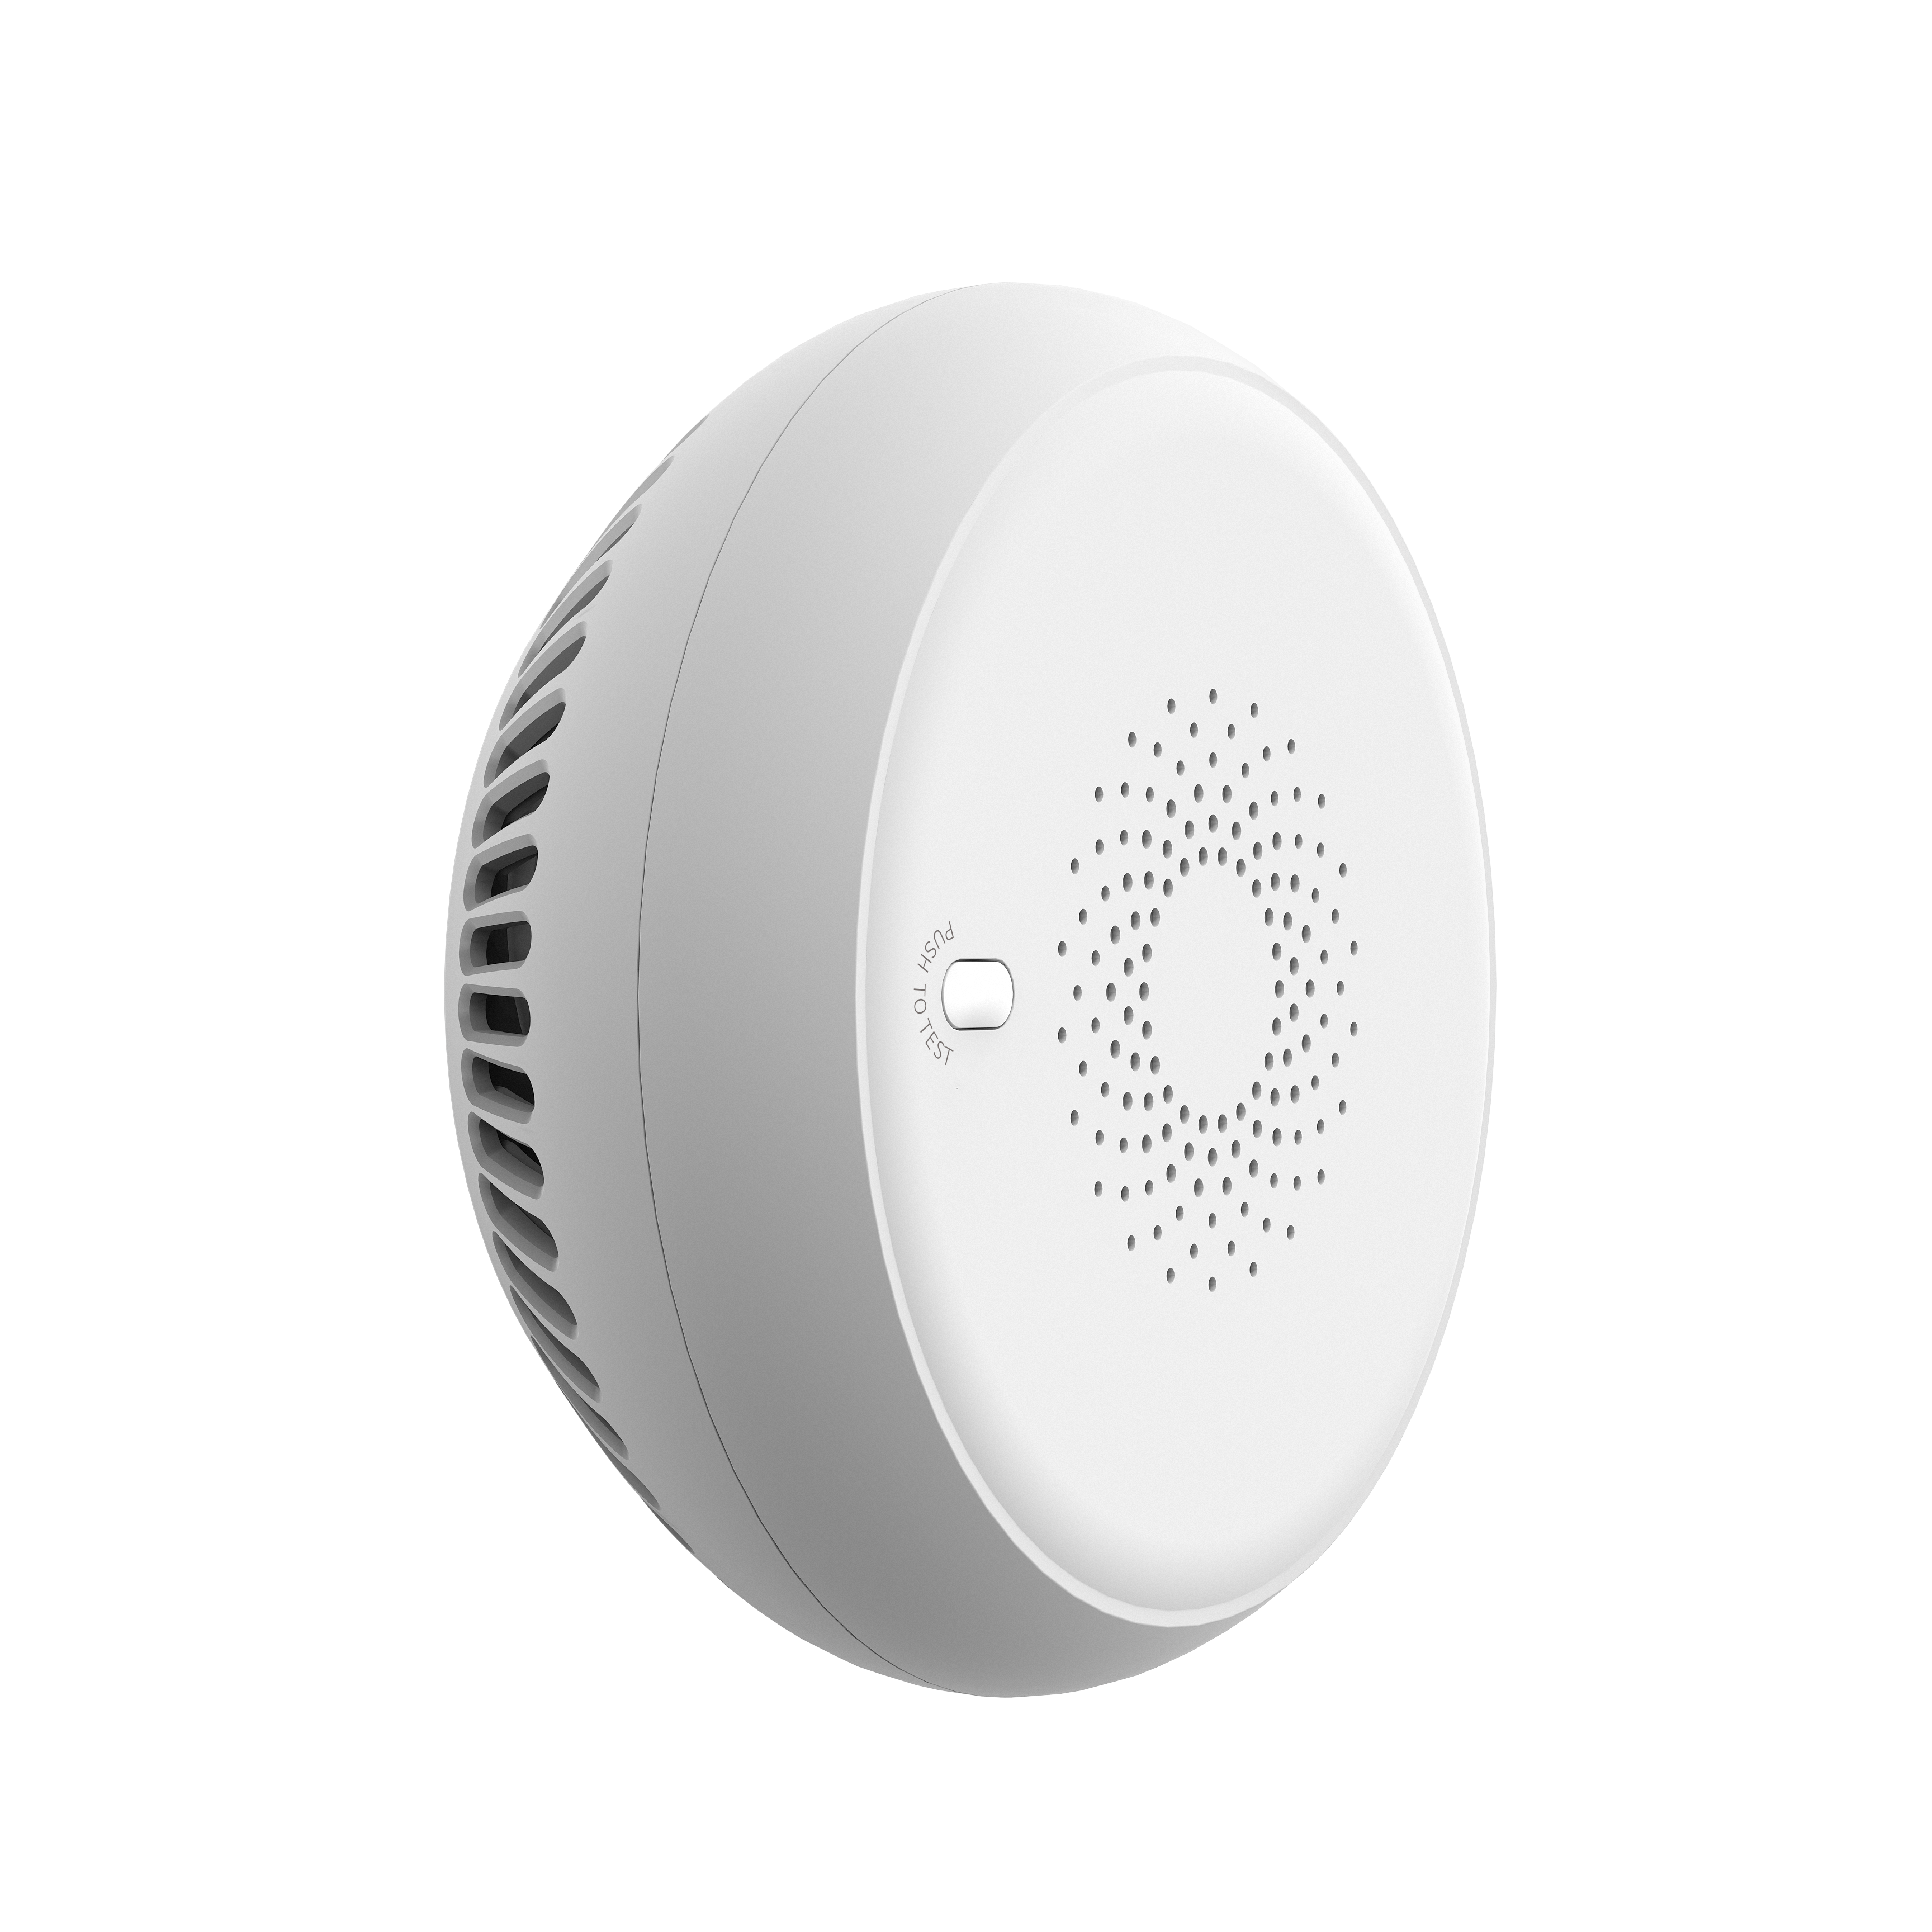 Independent photoelectric smoke fire detection alarm